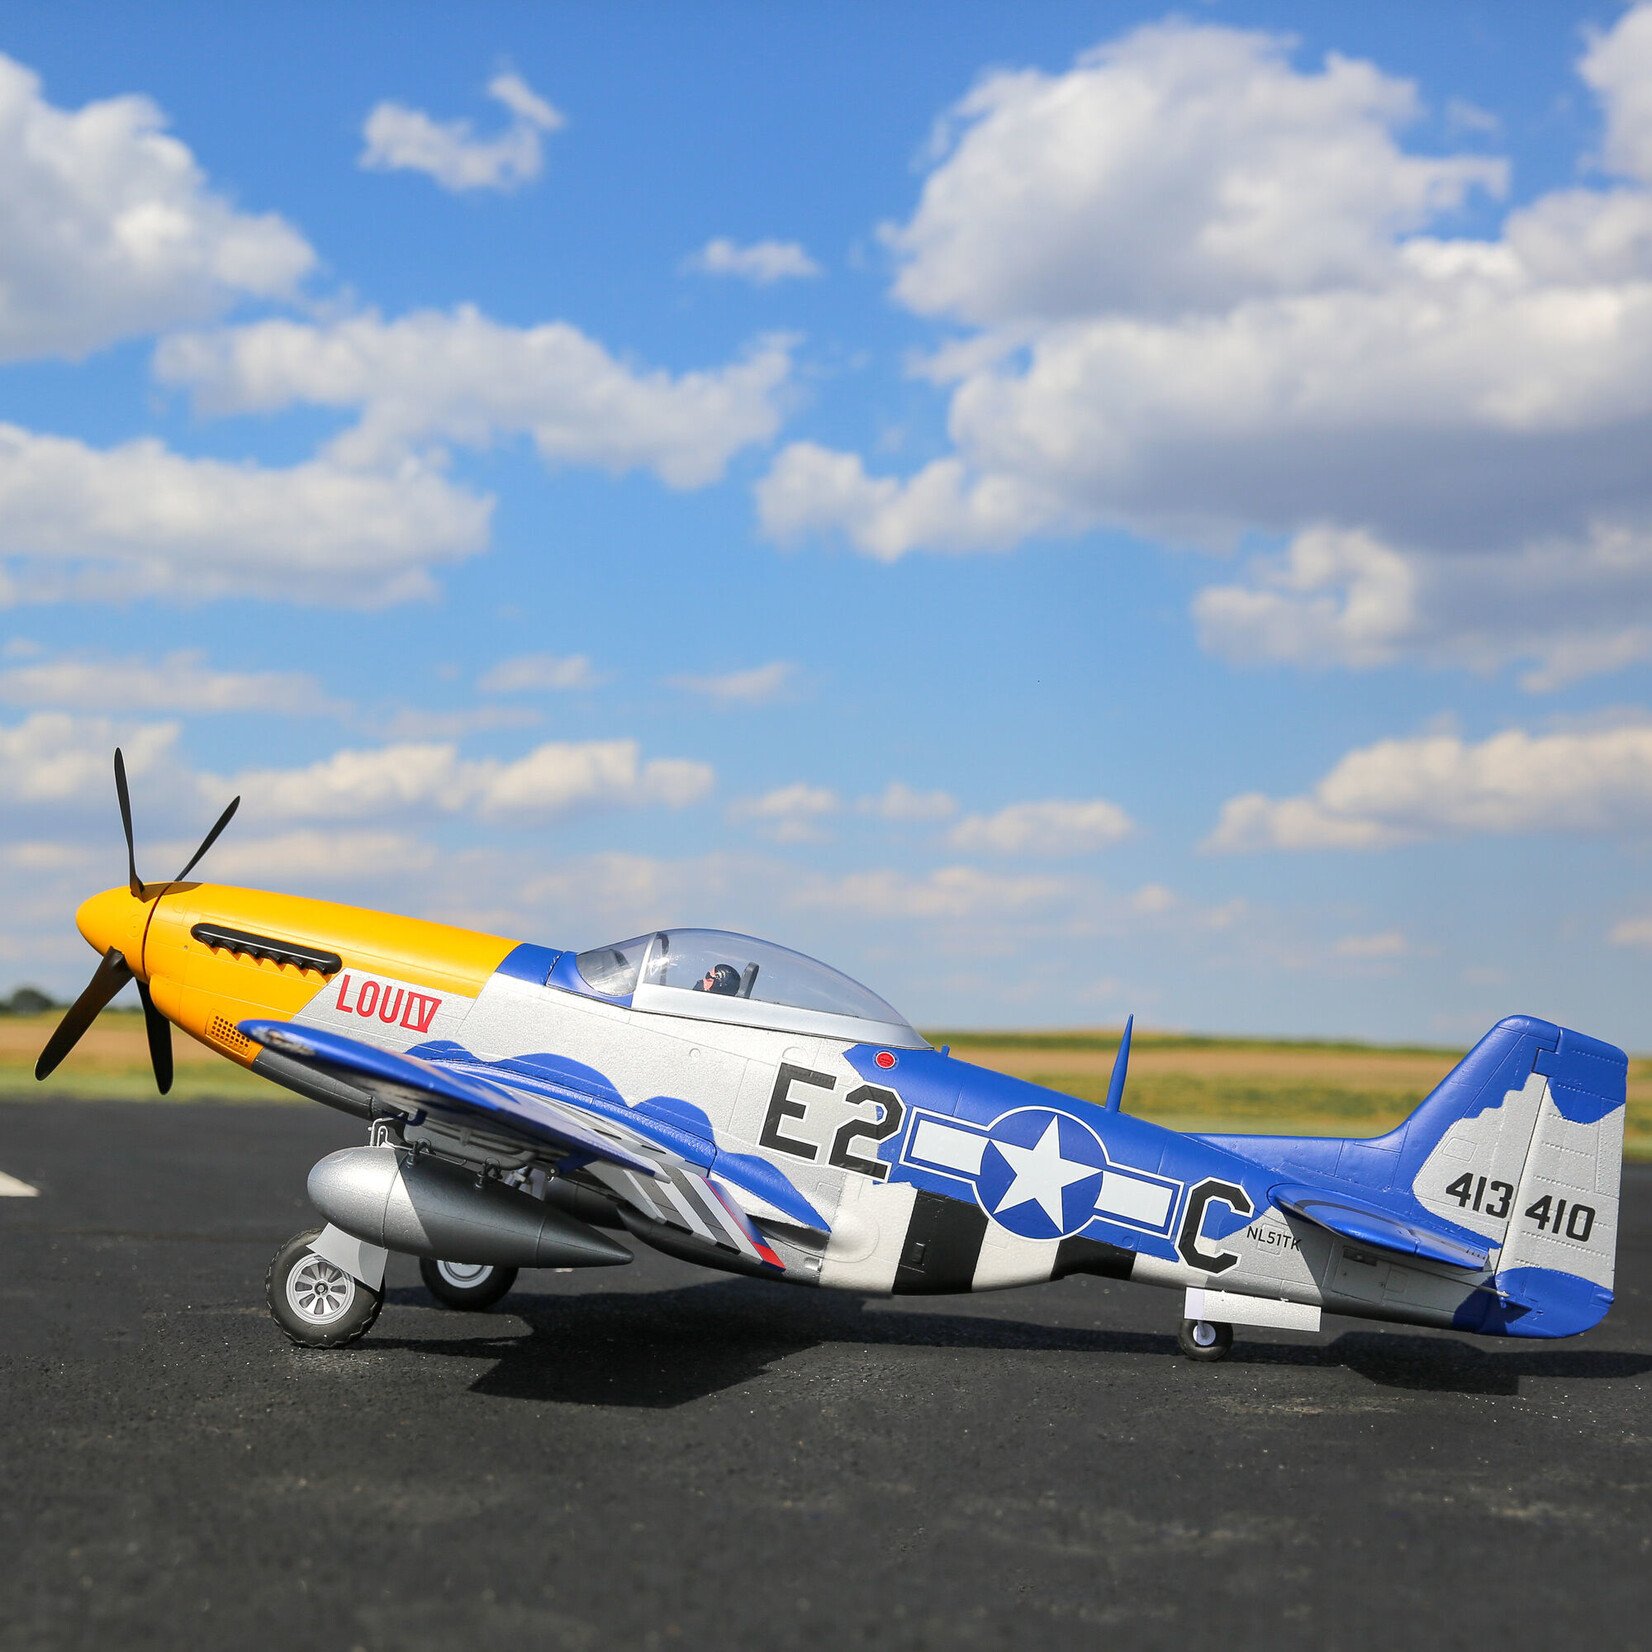 E-Flite P-51D Mustang 1.5m Smart BNF Basic with AS3X and SAFE Select